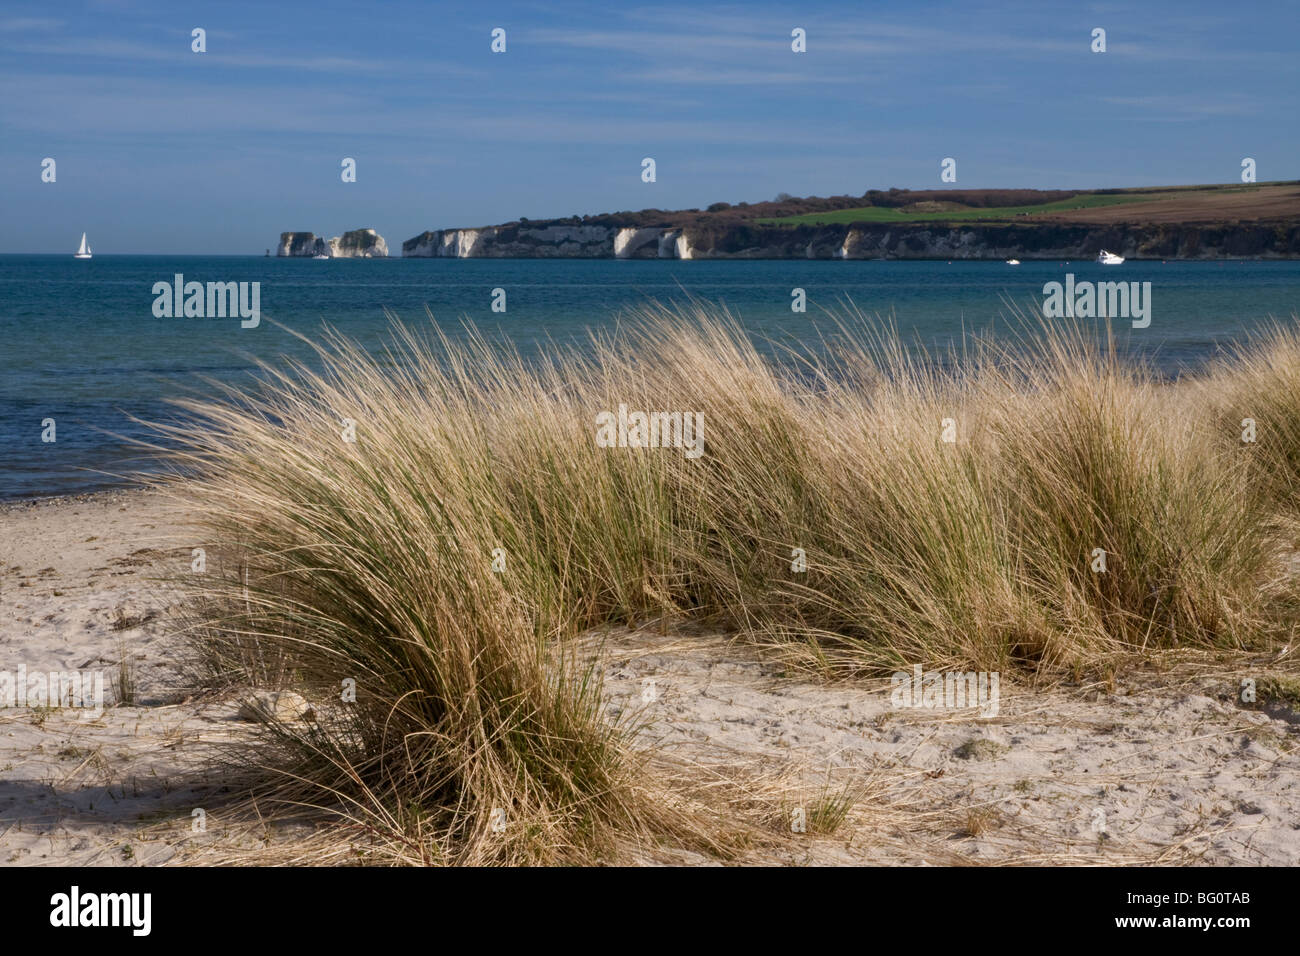 Studland Beach and The Foreland or Hardfast Point, showing Old Harry Rock, Isle of Purbeck, Dorset, England, United Kingdom Stock Photo